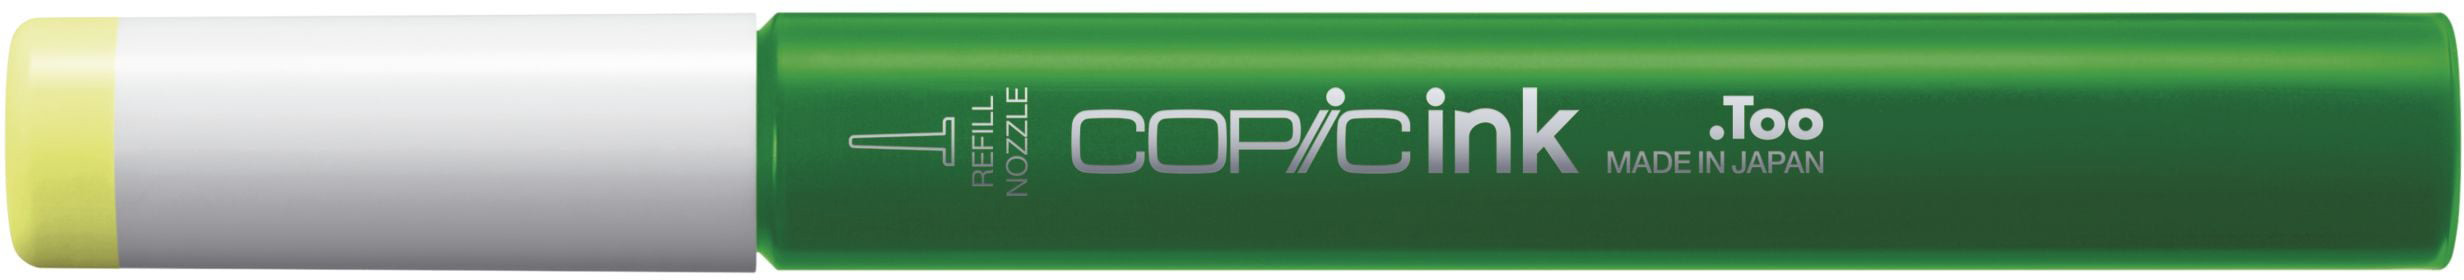 COPIC Ink Refill 21076148 YG01 - Green Bice